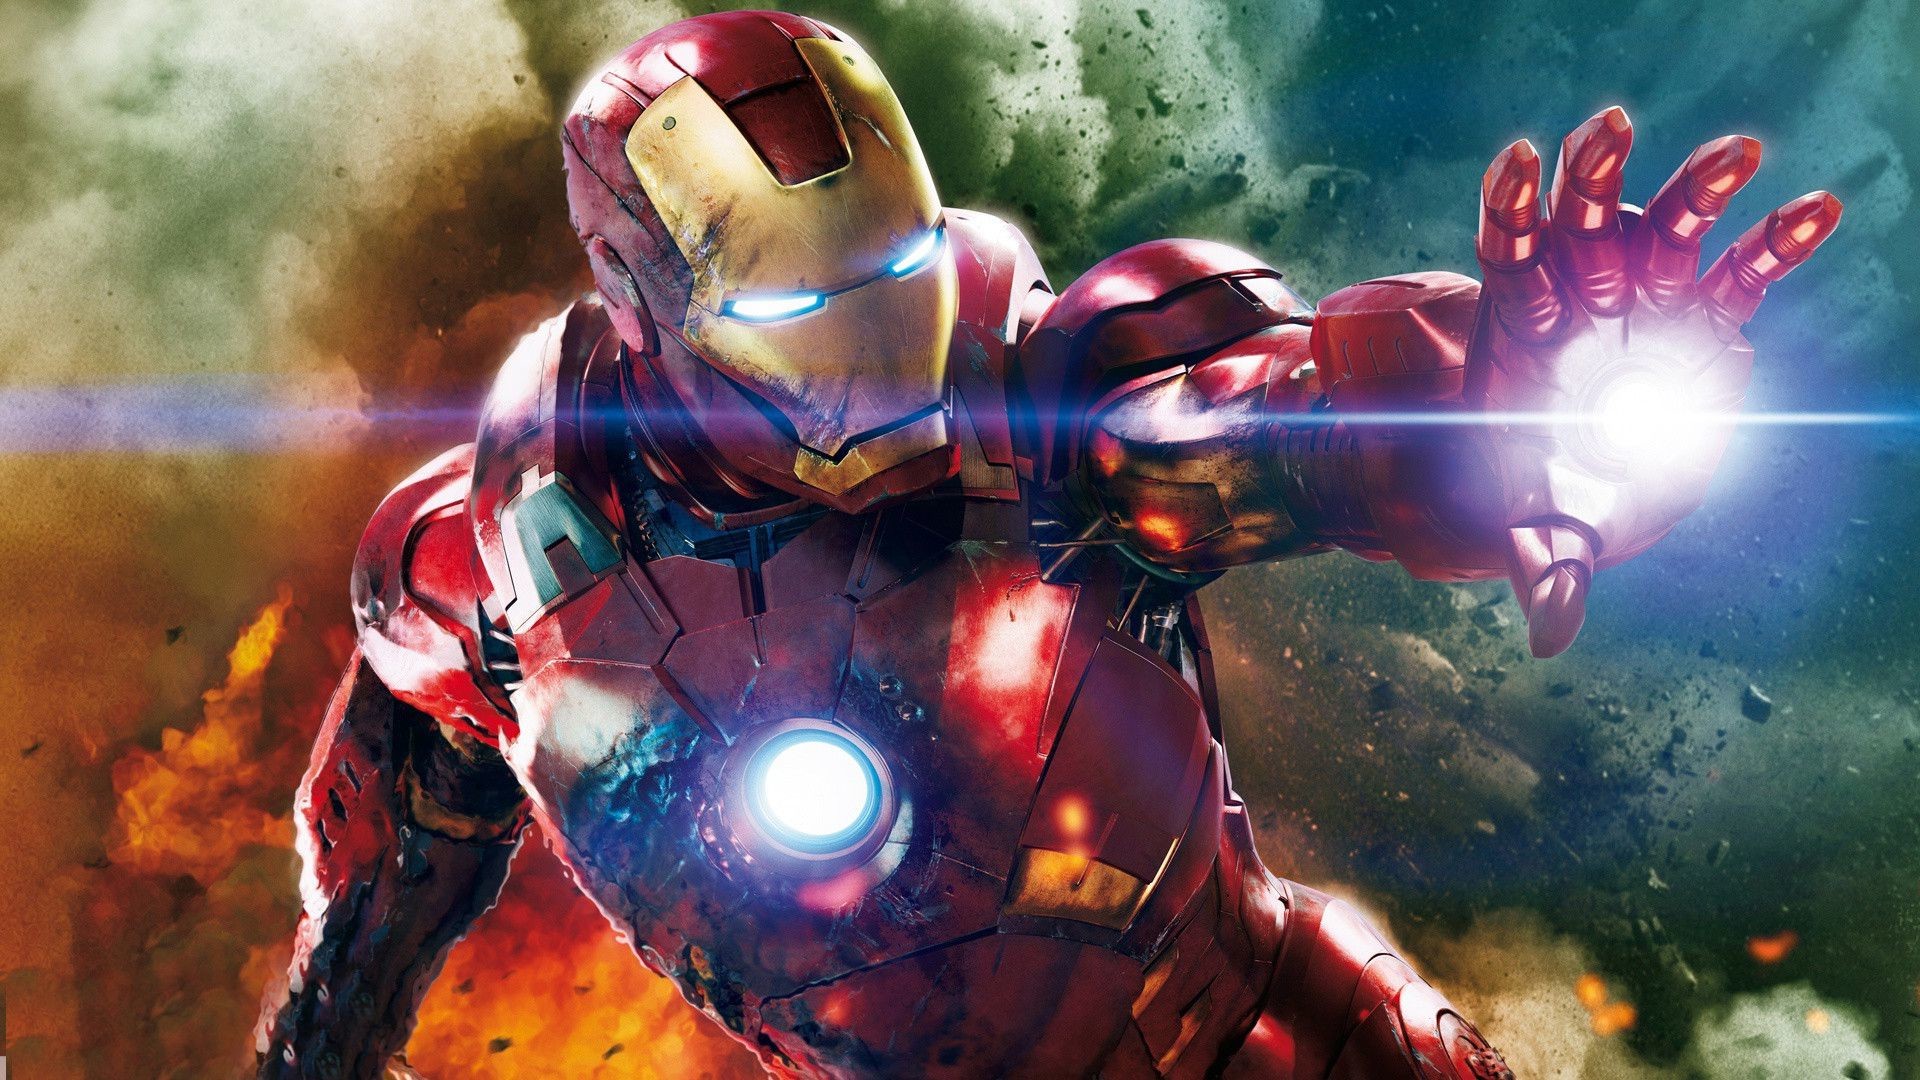 Collection of Iron Man Hd Wallpaper on Spyder Wallpapers